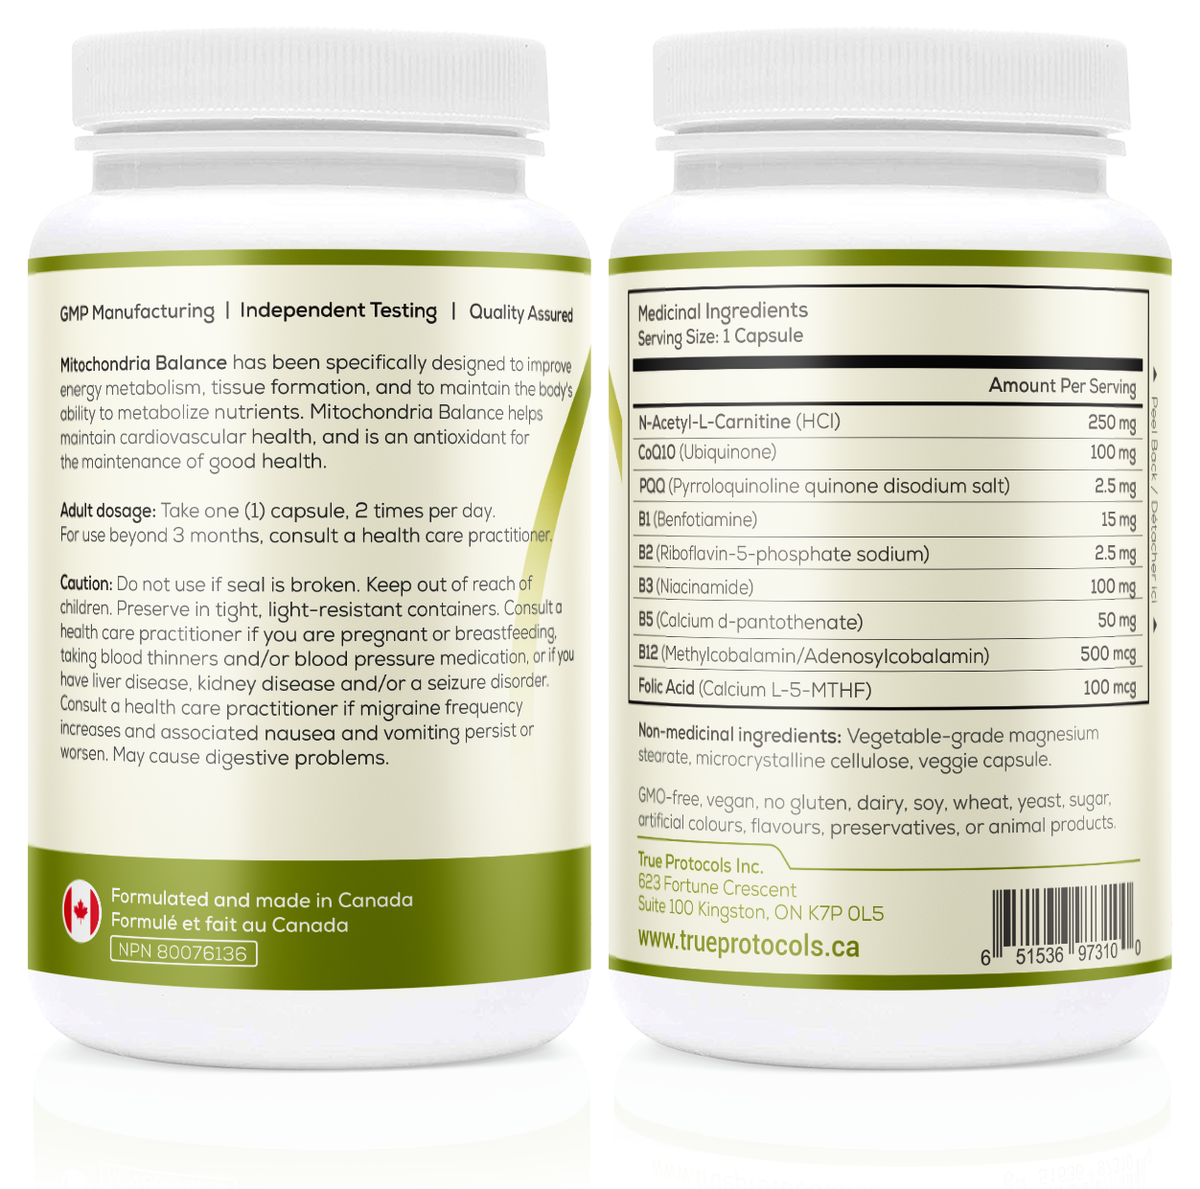 Muscle Protocol+ - Magnesium Balance, Vitamin D-K2 Balance &amp; Mitochondria Balance - Bioavailable Capsules for Optimal Muscle Function, Bone Health, Stress Relief, and Sleep